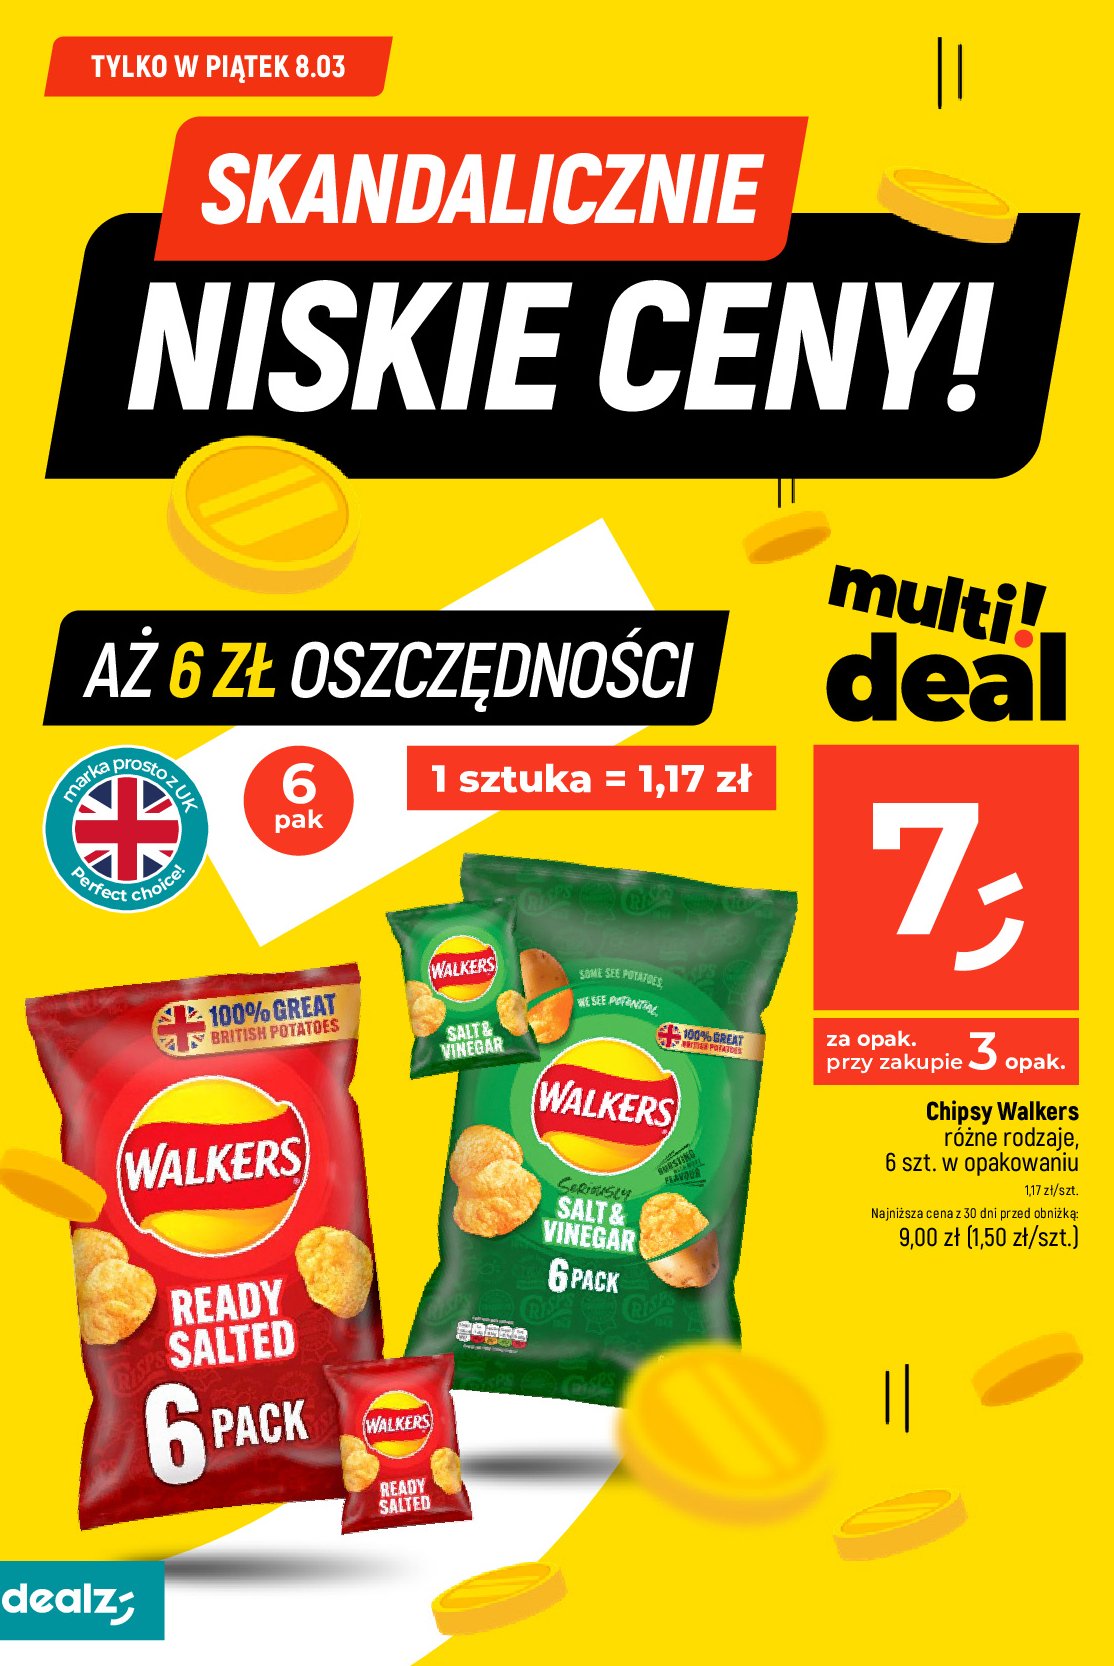 Chipsy ready salted WALKERS FRITO LAY WALKERS promocja